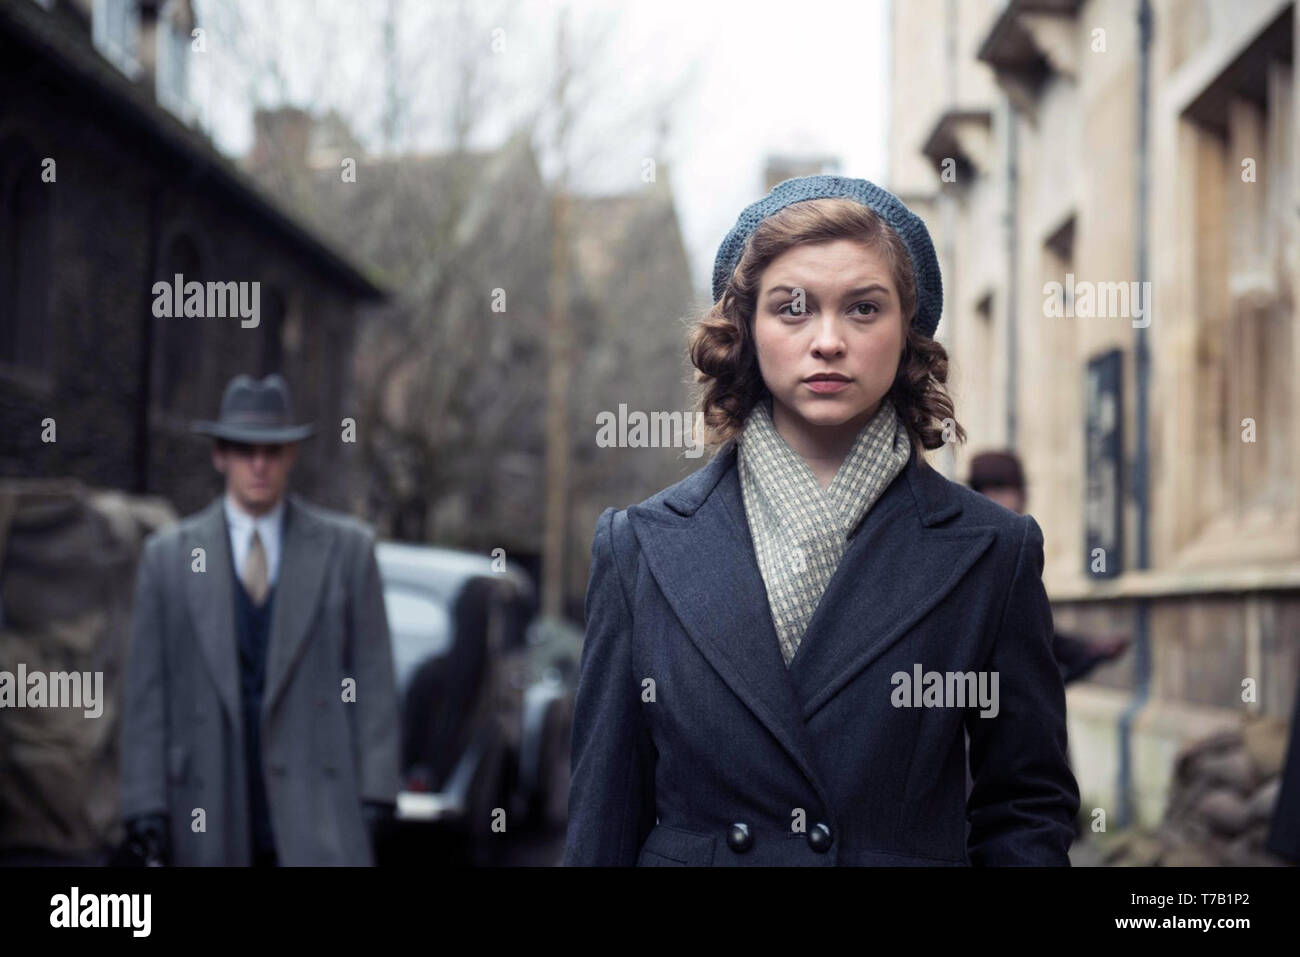 Red Joan is a 2018 British spy drama film, directed by Trevor Nunn, from a screenplay by Lindsay Shapero. The Stephen Campbell Moore, Sophie Cookson, Tom Hughes, Ben Miles, Nina